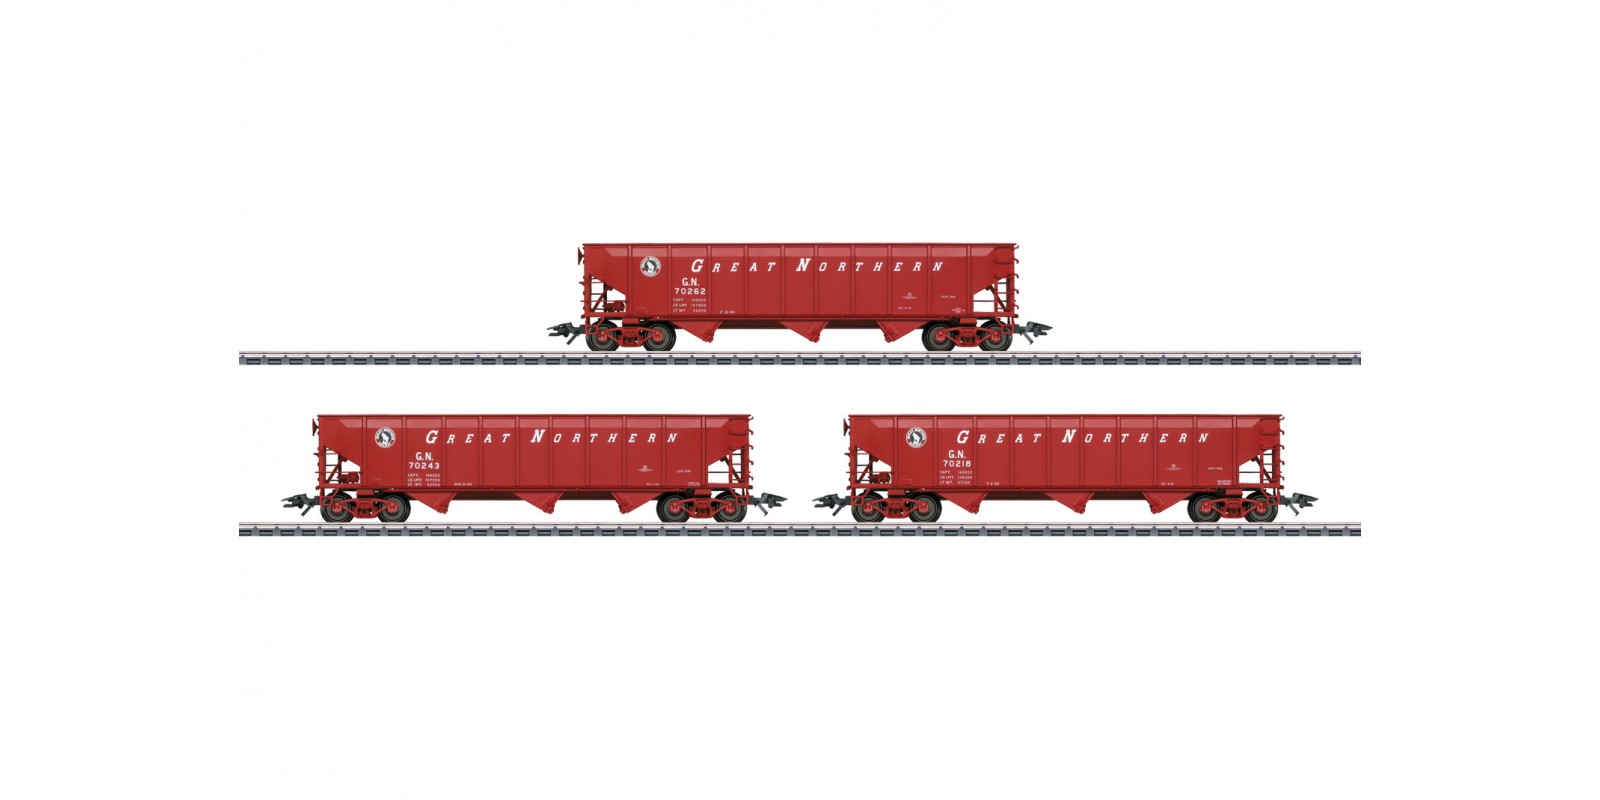 45661 Set with 3 Hopper Cars